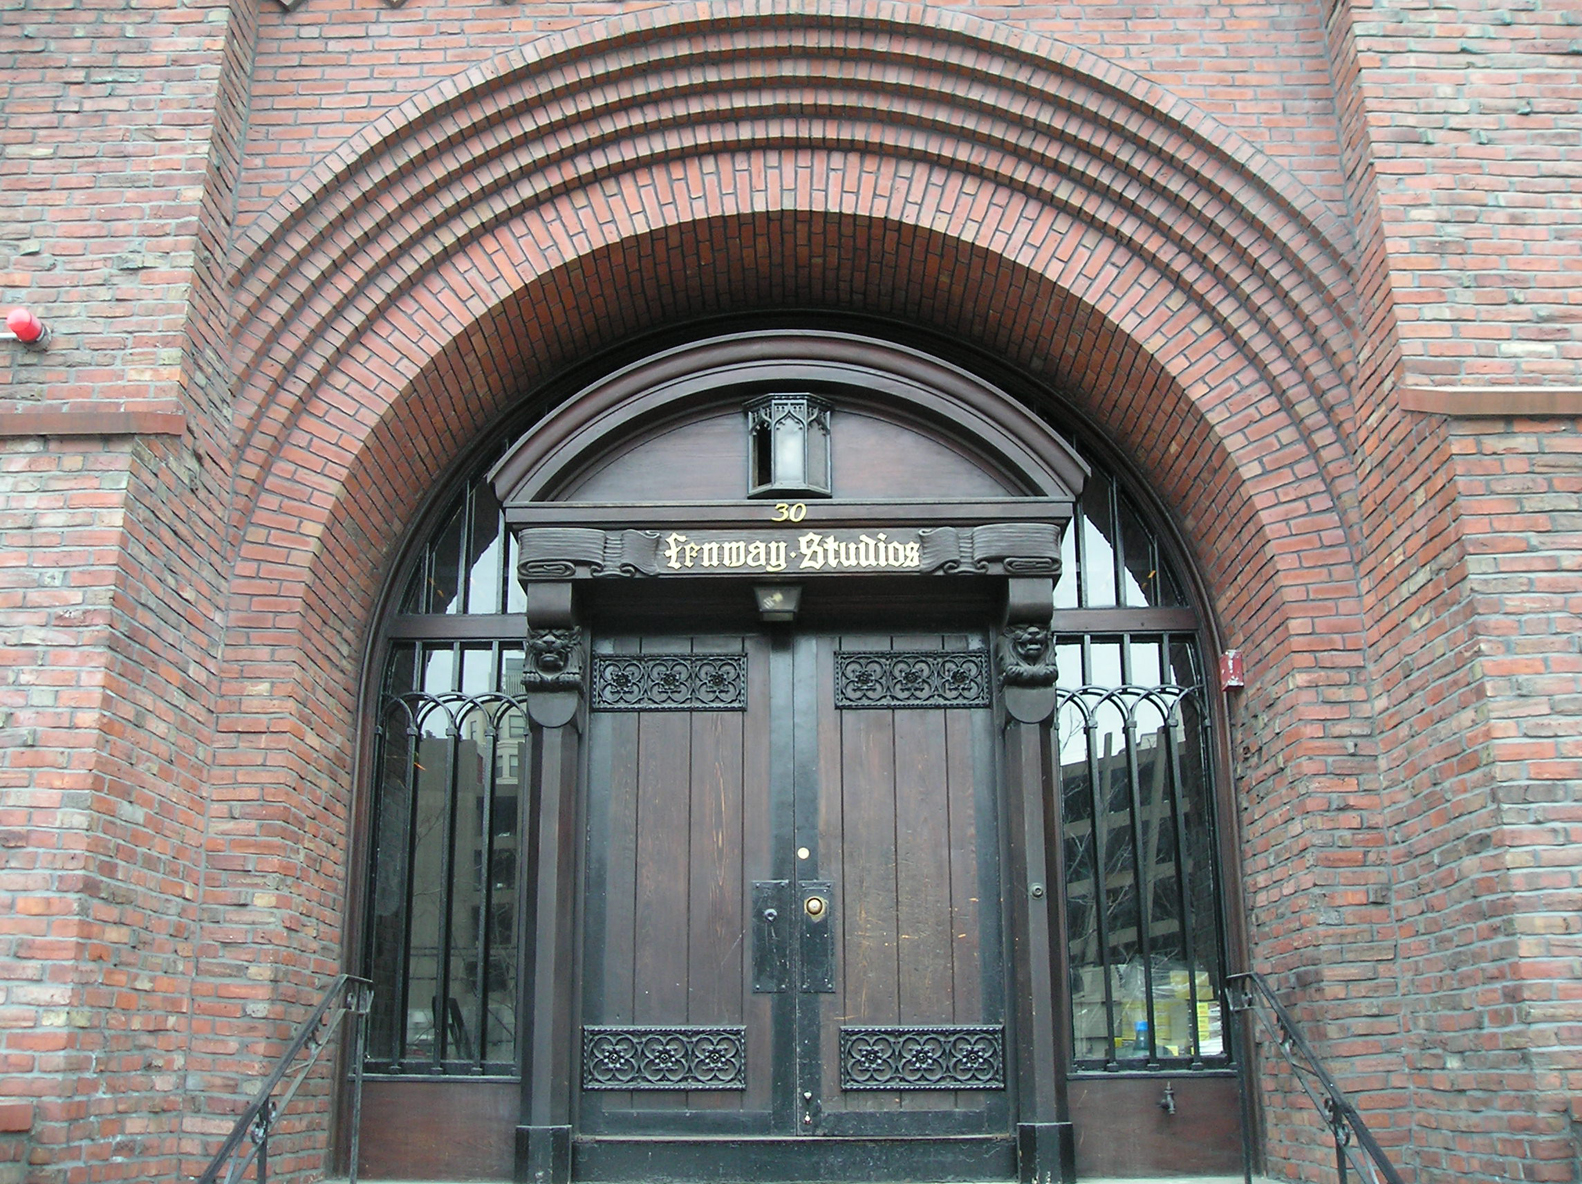 The entranceway to Fenway Studios on Ipswitch Street in downtown Boston as photographed on 29 January 2007.